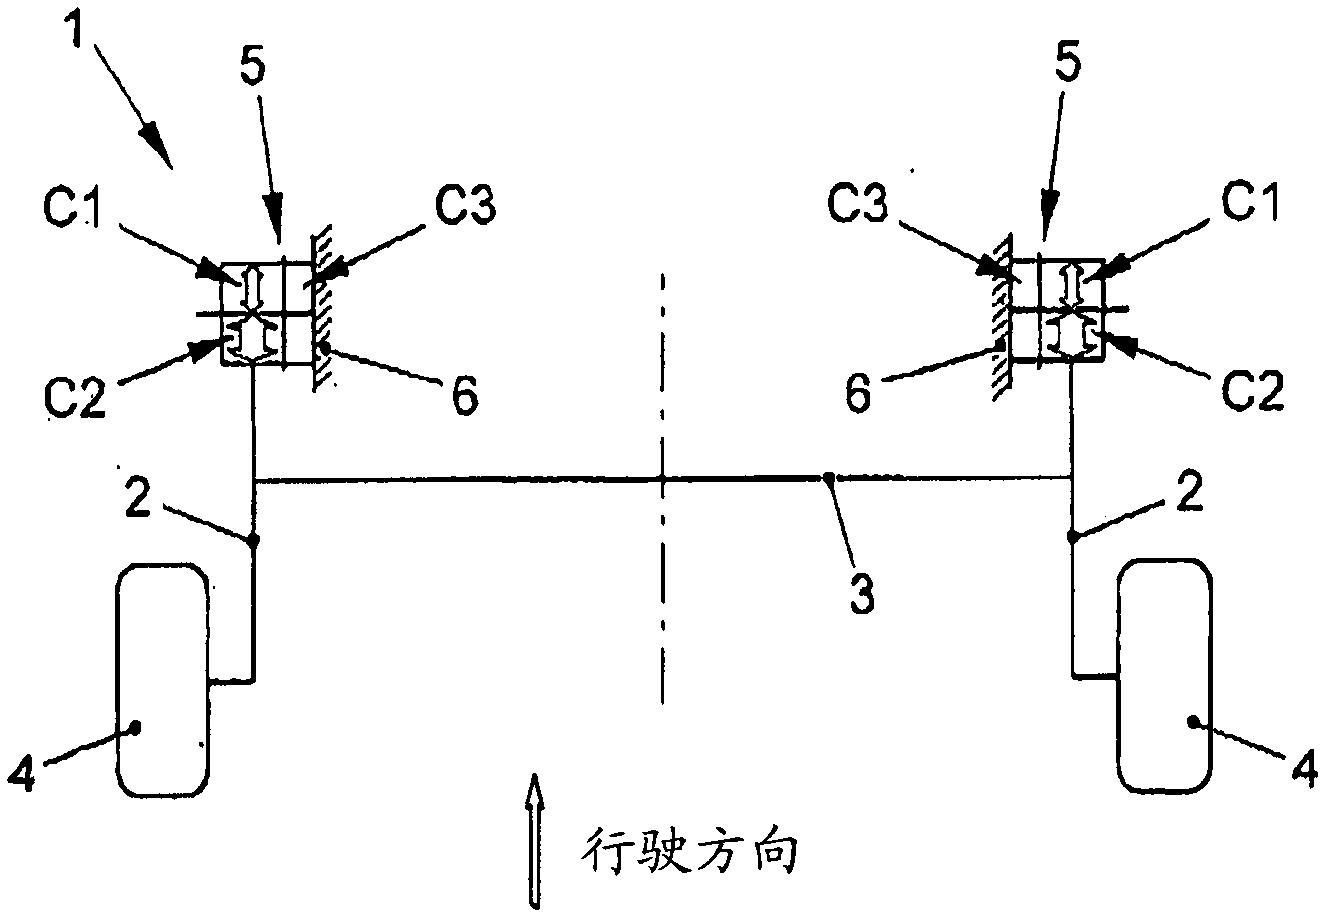 Axle guide bearing for coupling rear axle with vehicle body of motor vehicle